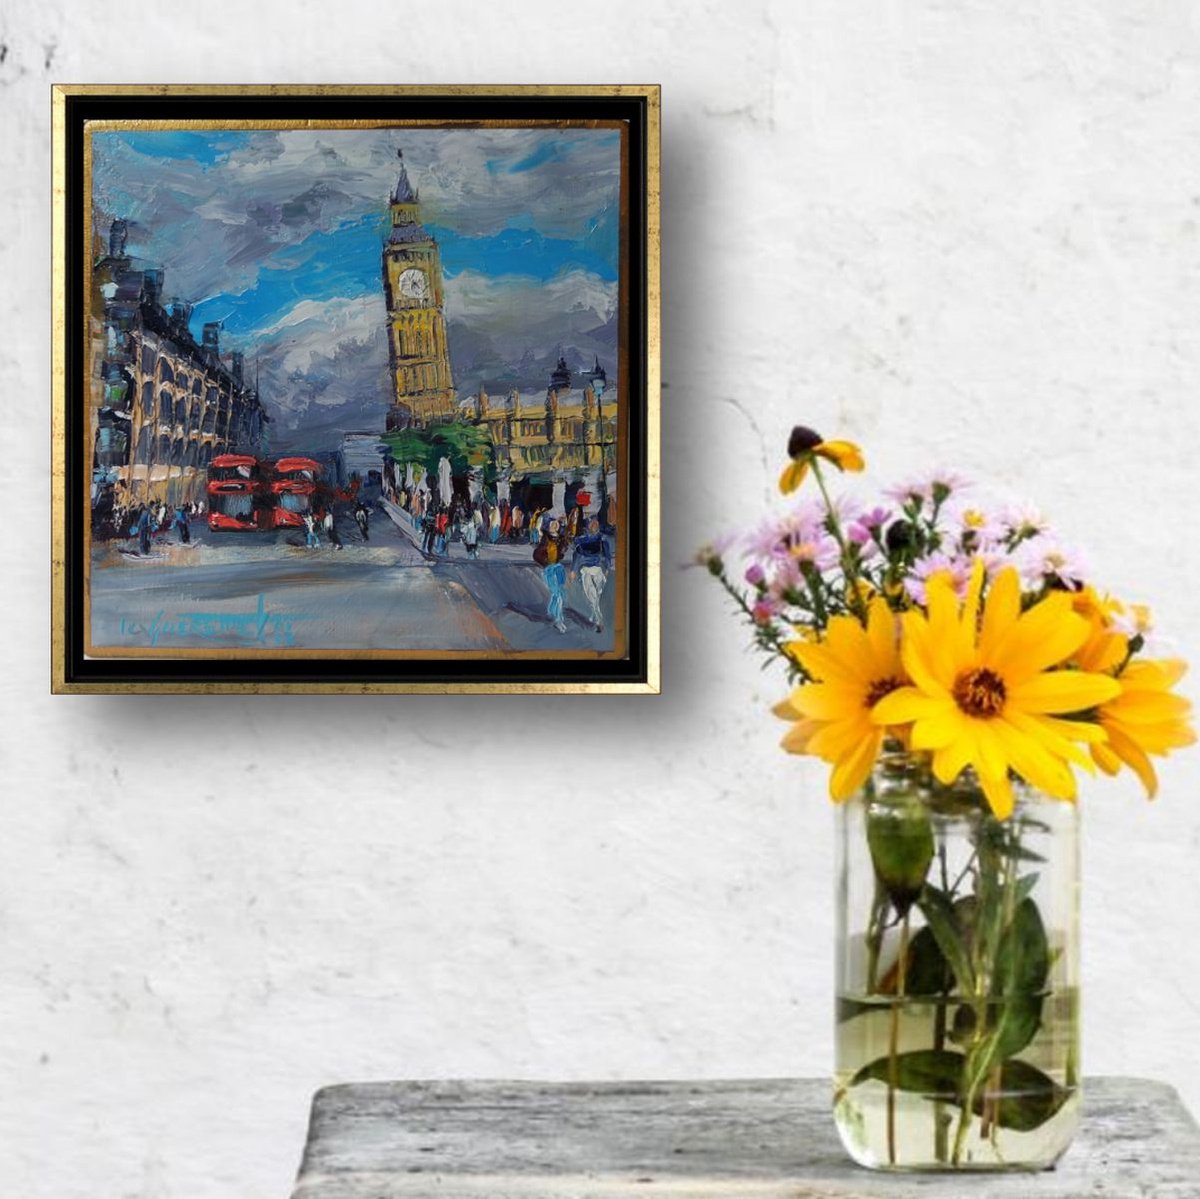 LONDON’S BIG BEN - Small Oil Painting on Panel by Ion Sheremet